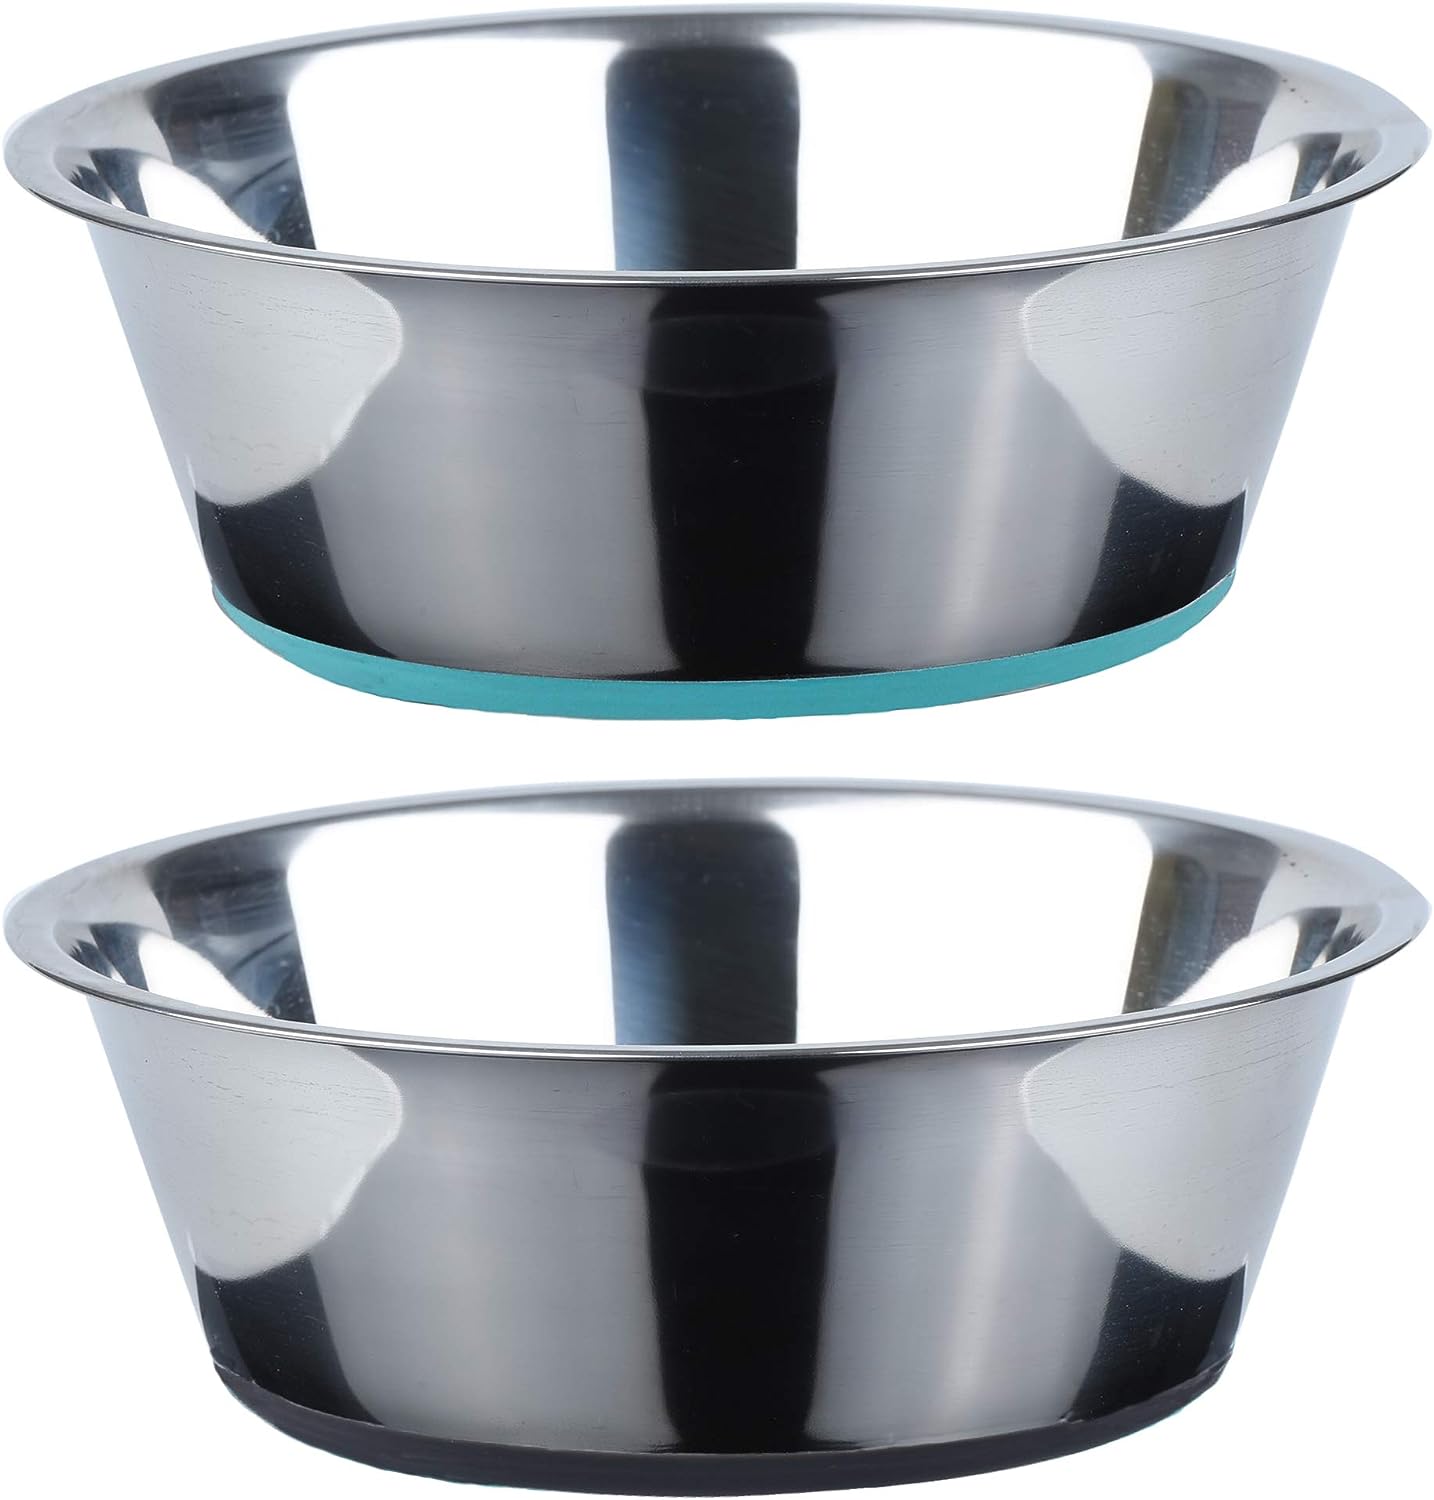 PEGGY11 Deep Stainless Steel Anti-Slip Dog Bowls Review